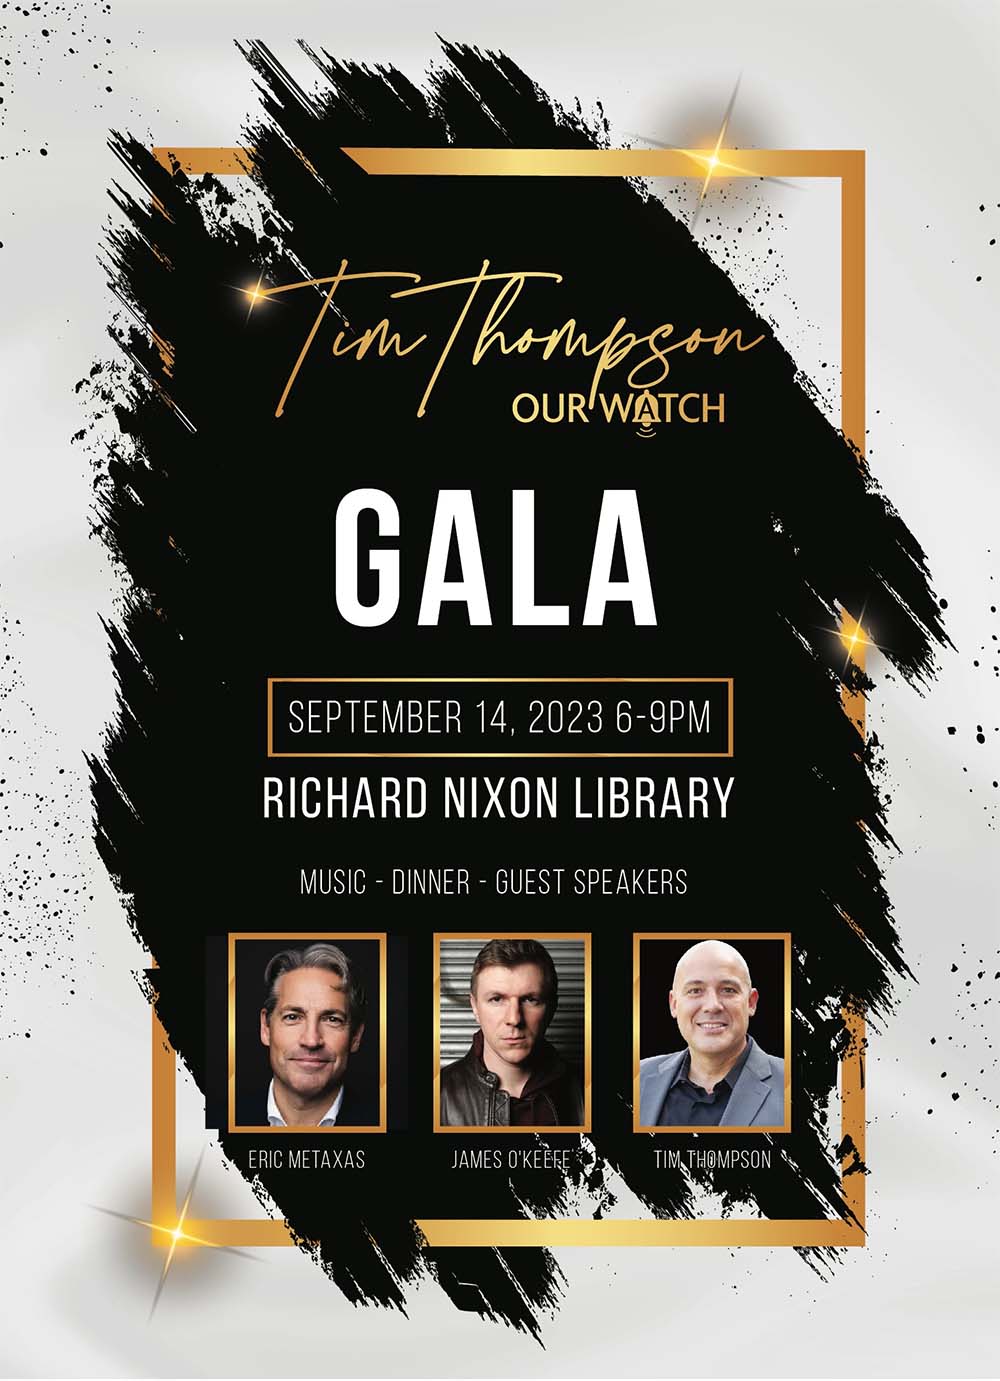 Our watch gala invitations